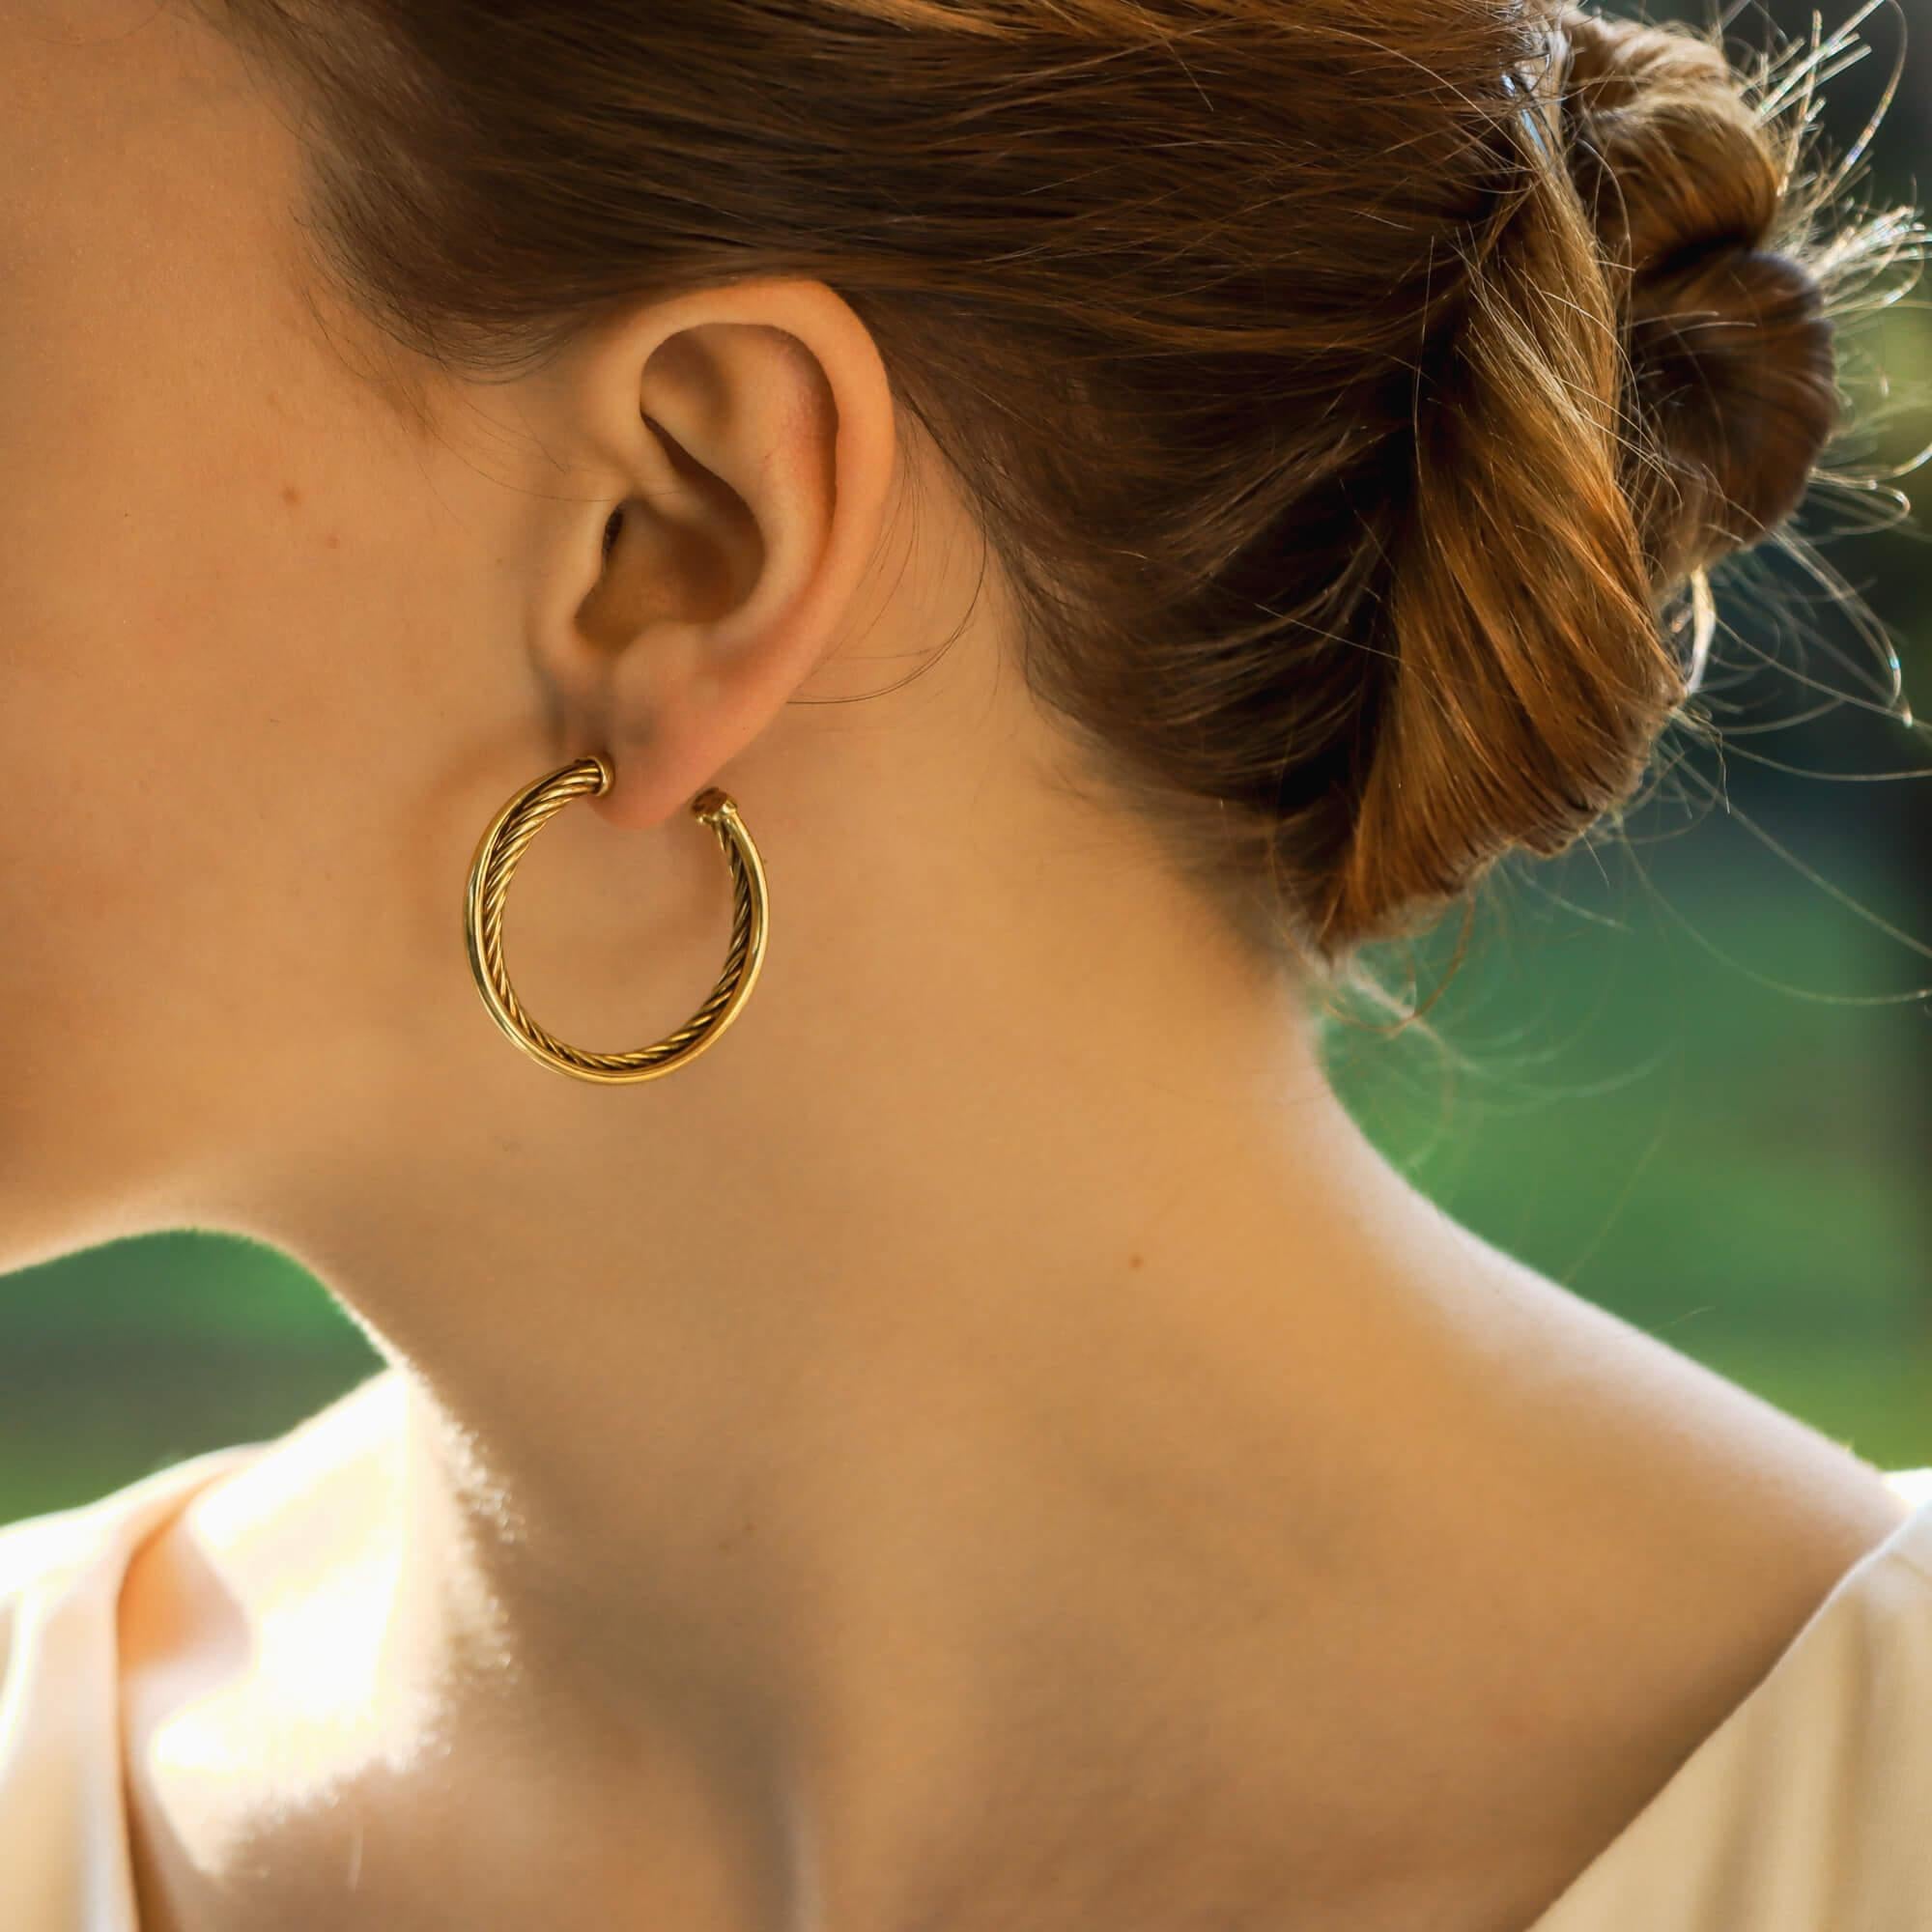 A stylish pair of yellow gold hoop earrings by David Yurman. 
The earrings are formed two entwined gold wires, one with a high polish finish and the other a contrasting rope design. 
The earrings are made of 18 carat yellow gold and have post and